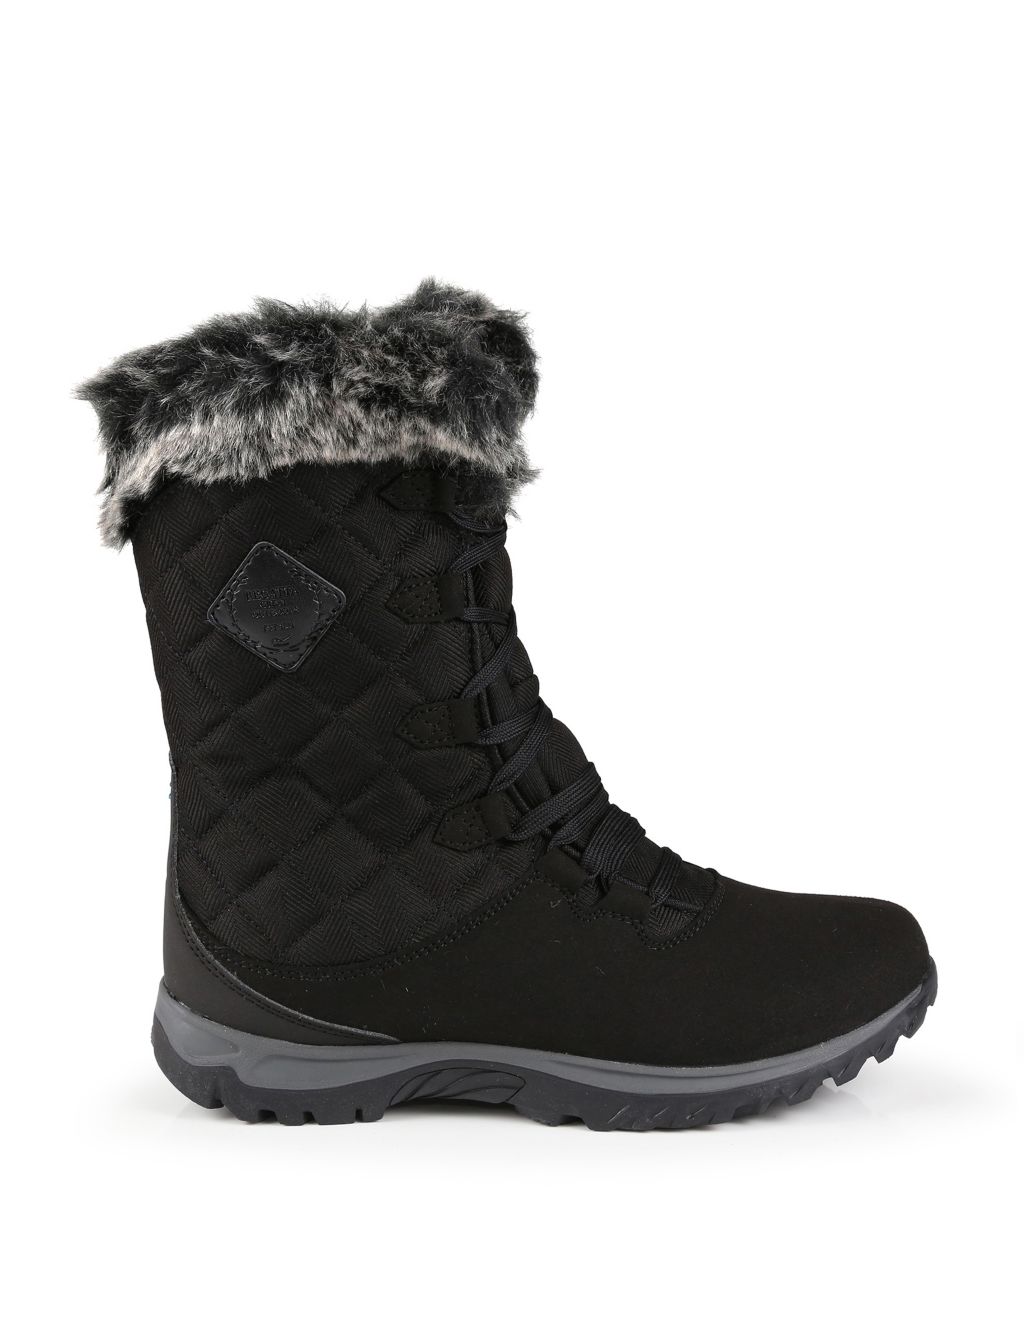 Lady Newley Thermo Winter Boots image 1